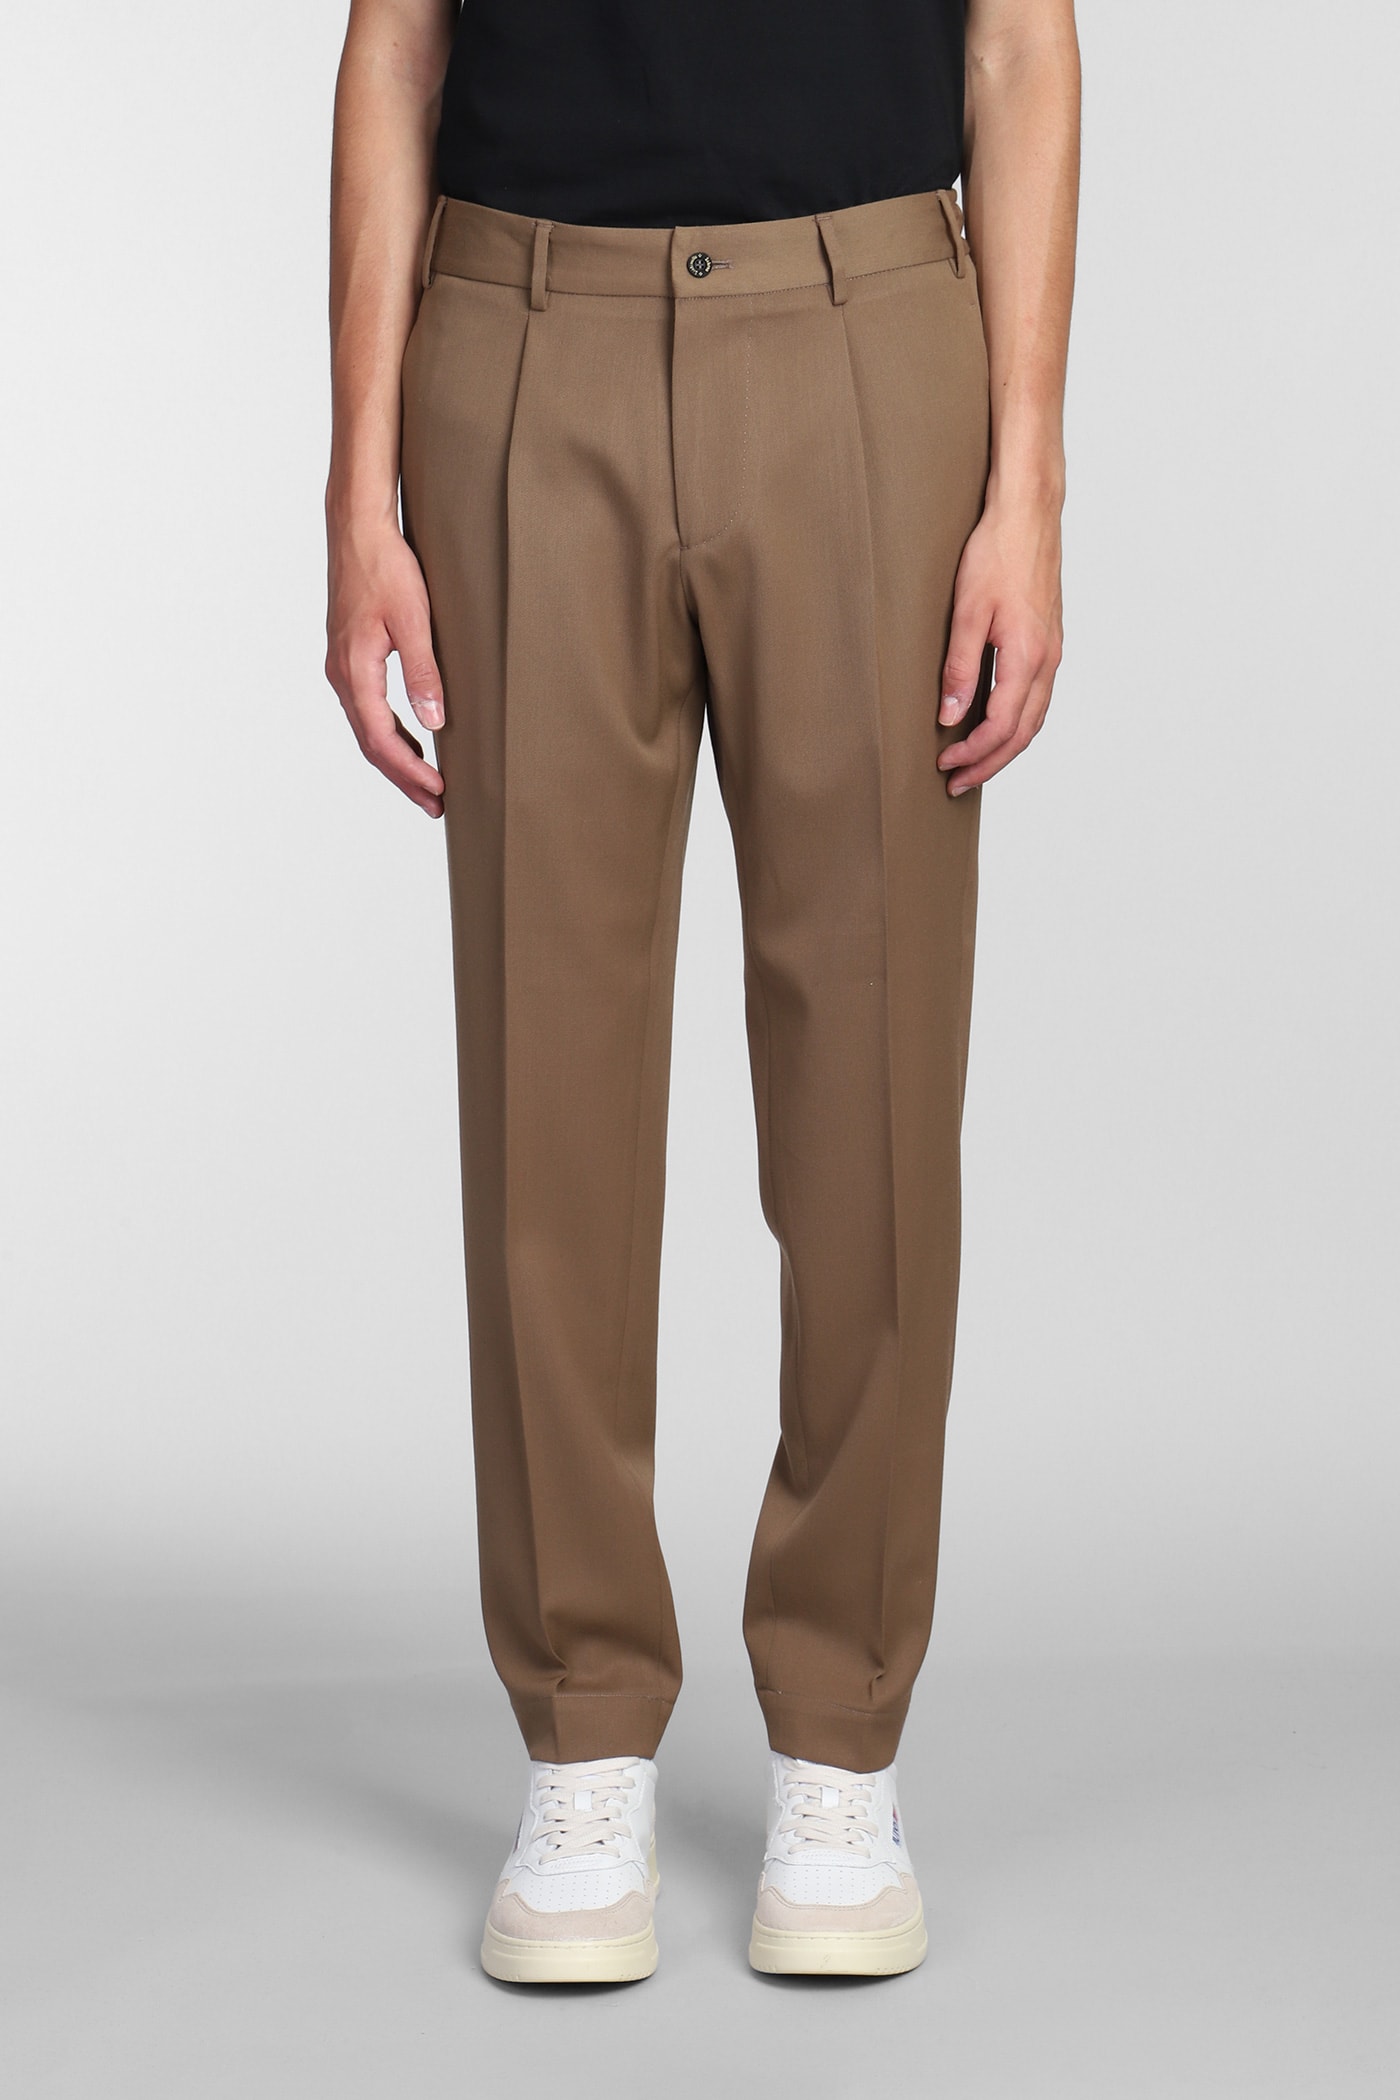 Pants In Camel Polyester